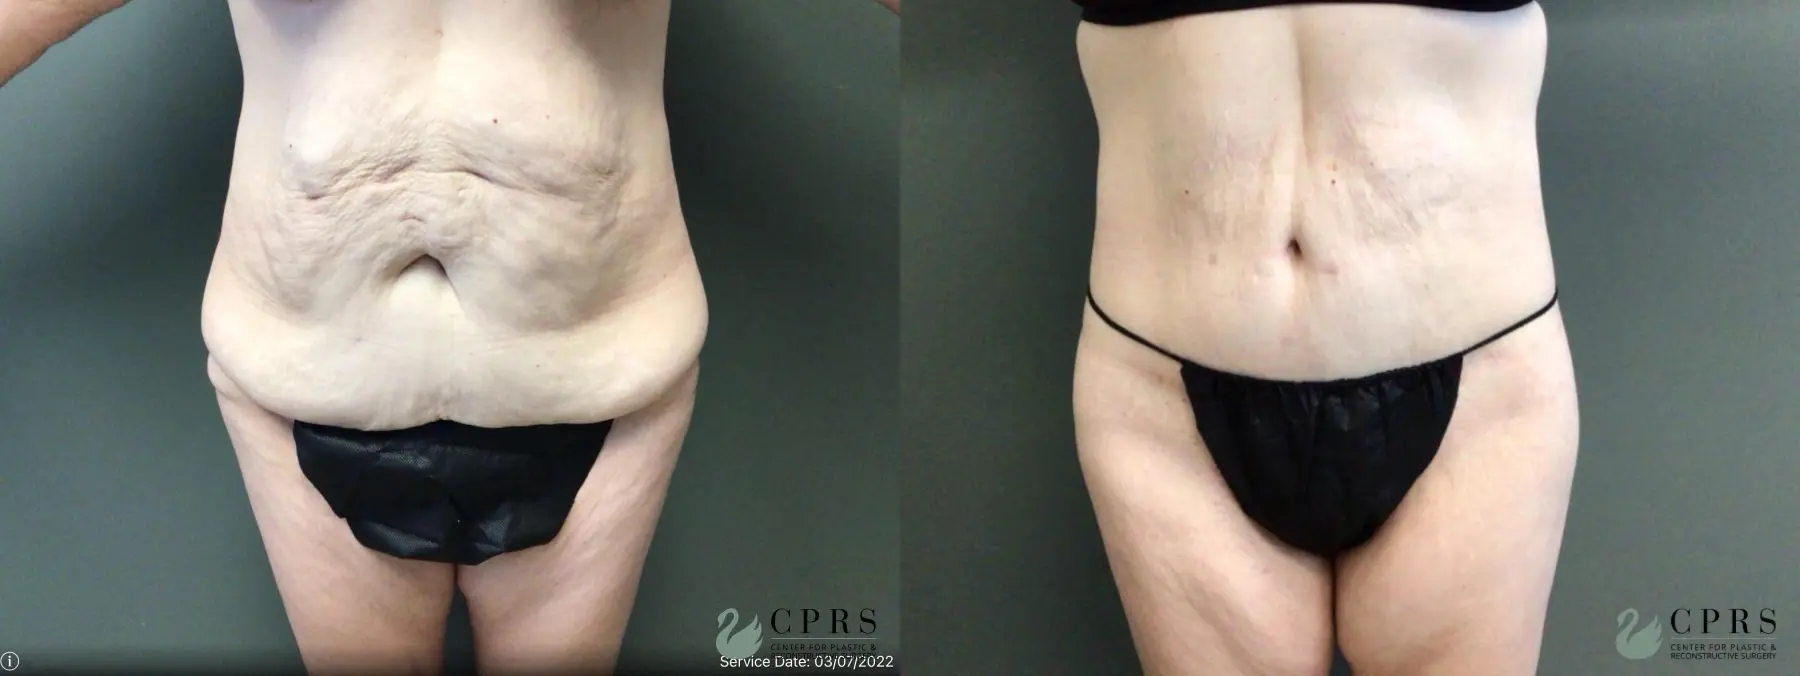 Body Lift: Patient 3 - Before and After  